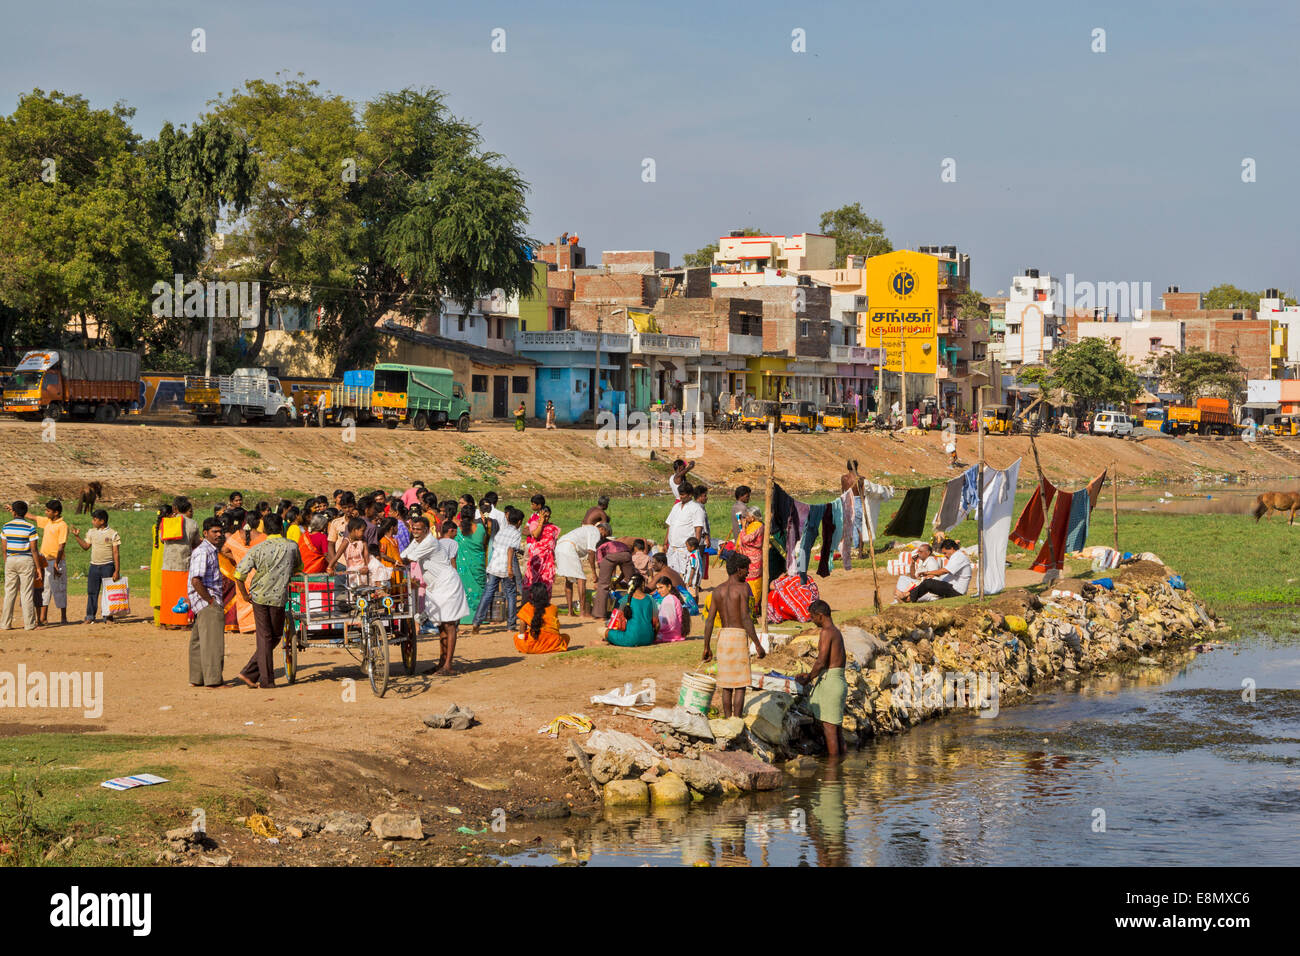 MADURAI INDIA WASHING DRYING ON THE RIVER BANK AND PEOPLE MEETING ON A DAY OUT Stock Photo